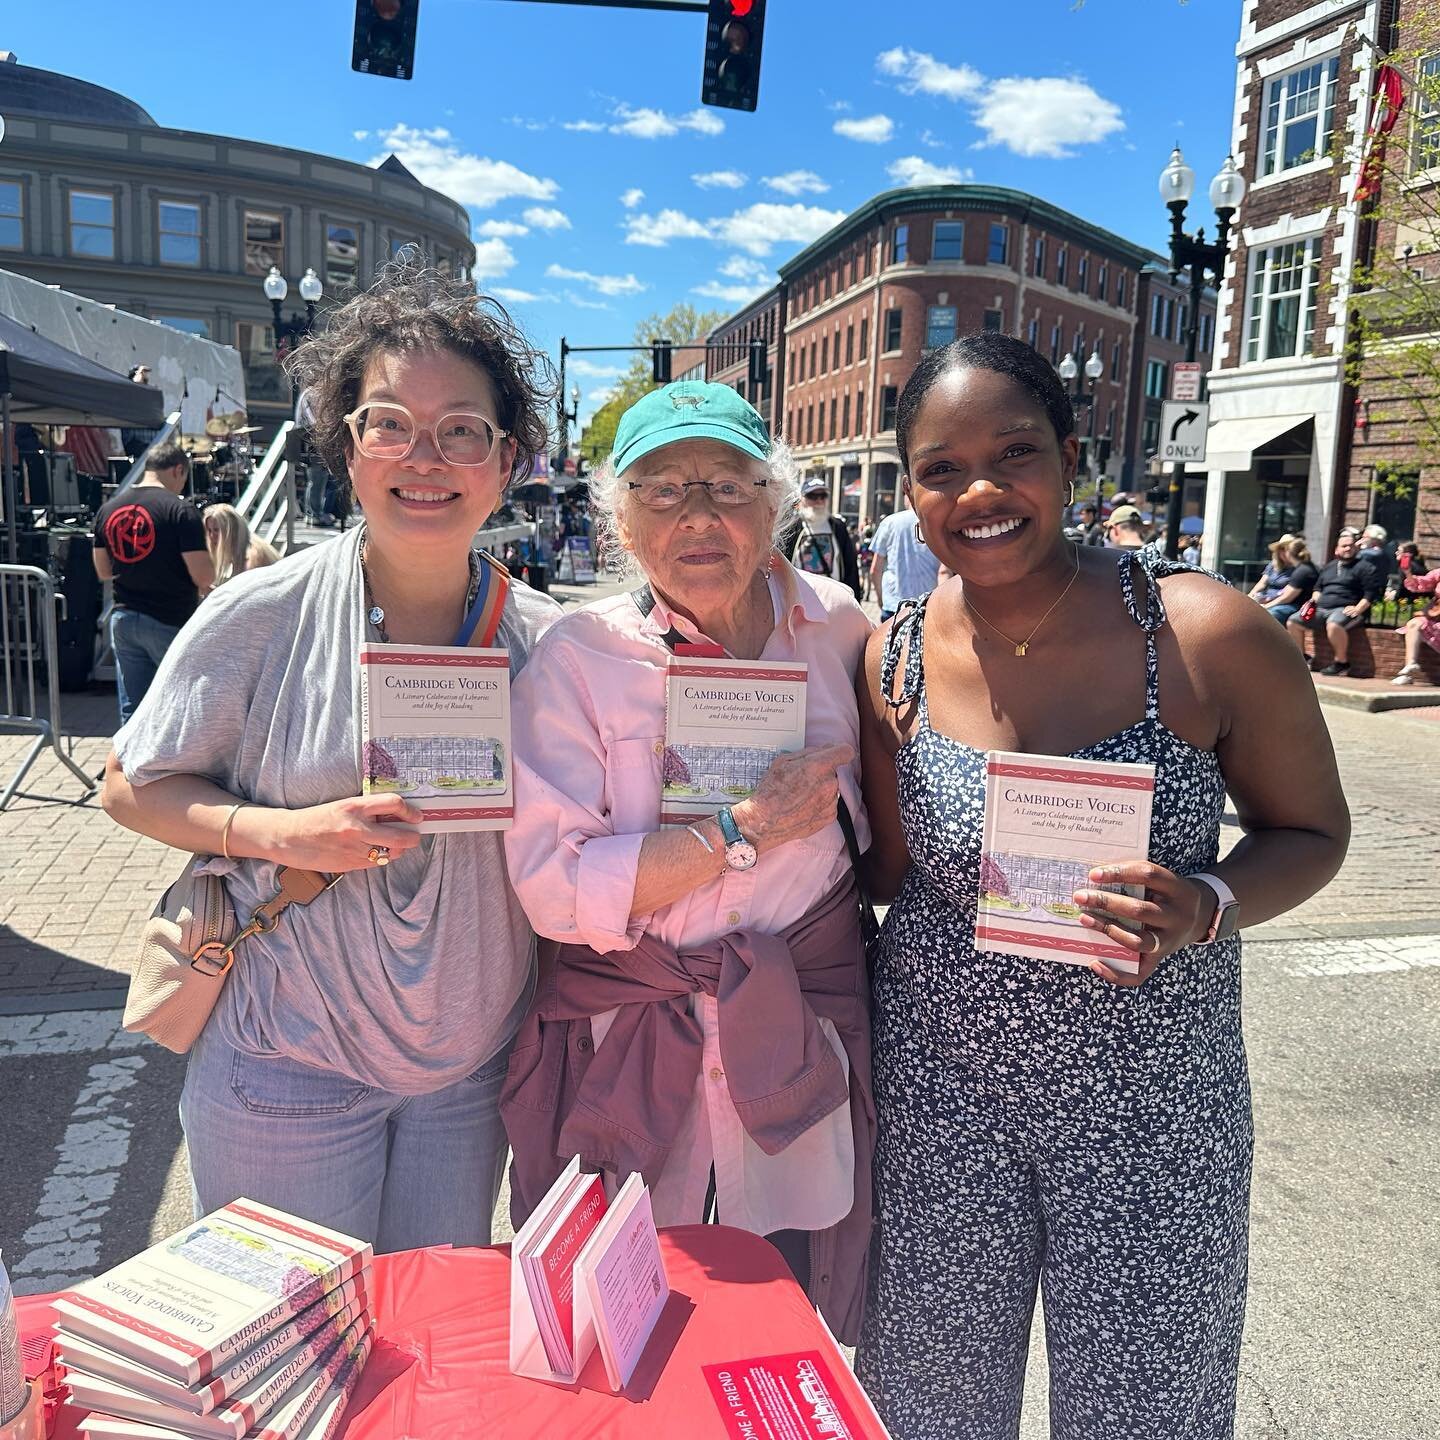 We were thrilled to meet Anne Bernays, one of the authors in the &ldquo;Cambridge Voices: A Literary Celebration of Libraries and the Joy of Reading&rdquo; book, at MayFair in Harvard Square today. Cambridge Voices was produced to mark the opening of